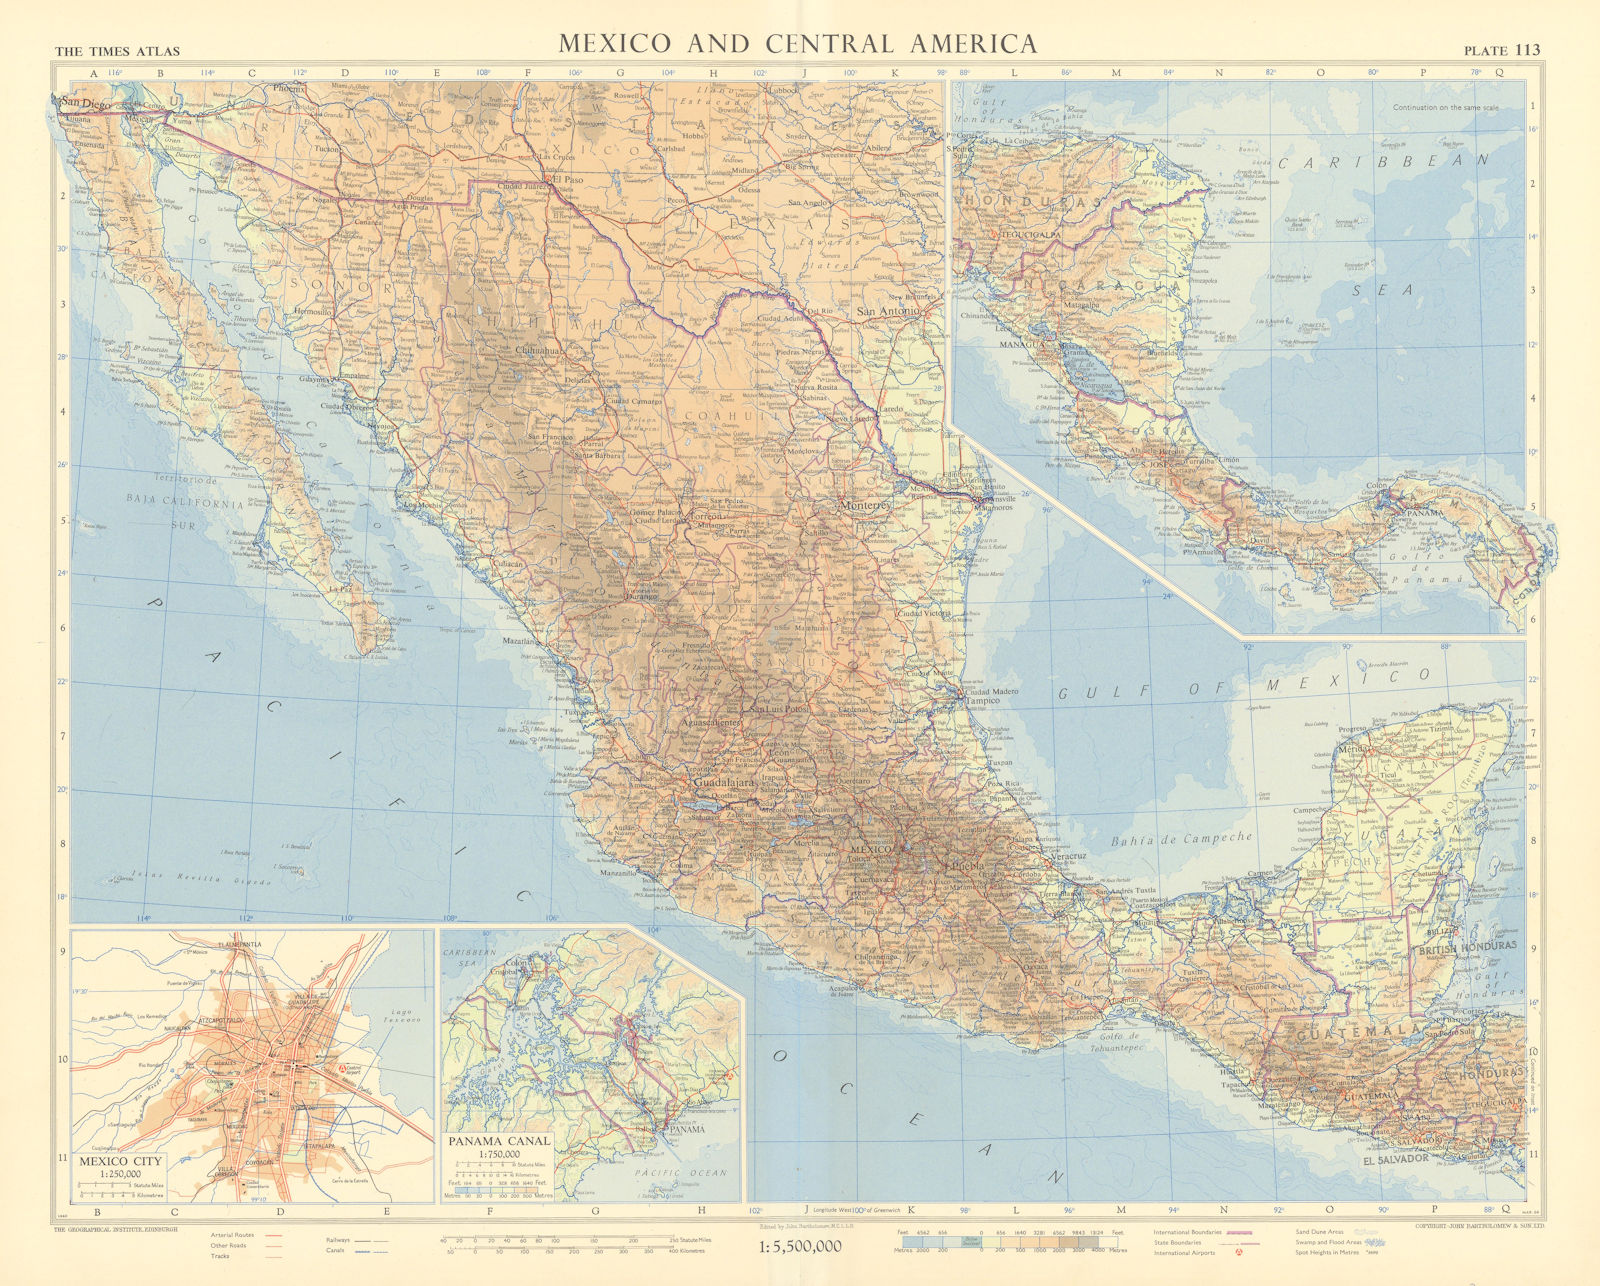 Associate Product Mexico and Central America. Mexico City. Panama Canal. TIMES 1957 old map